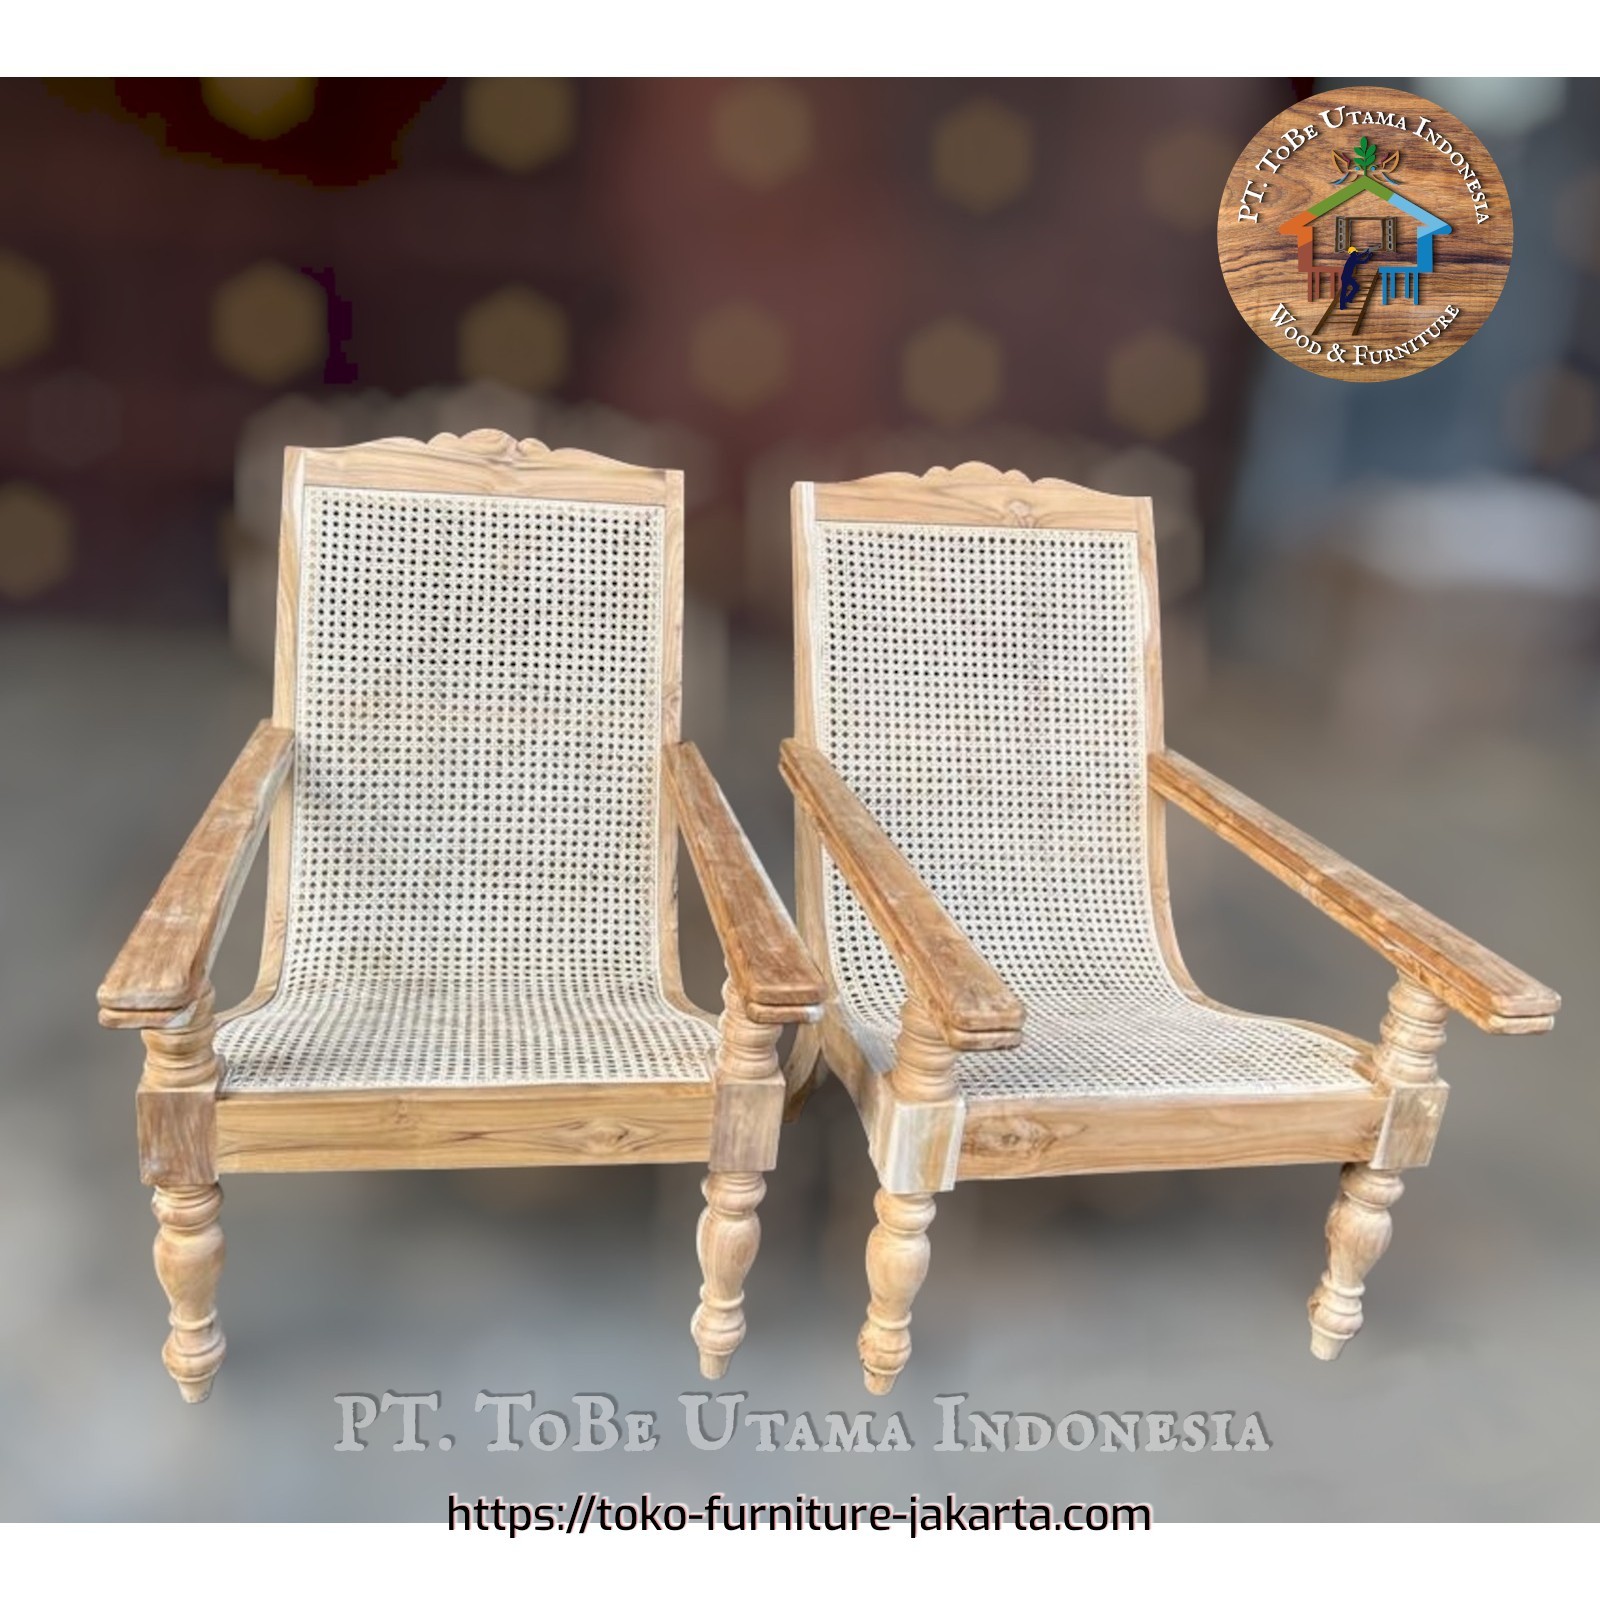 Living Room: Balinese Antique Rattan Chair (image 1 of 1).